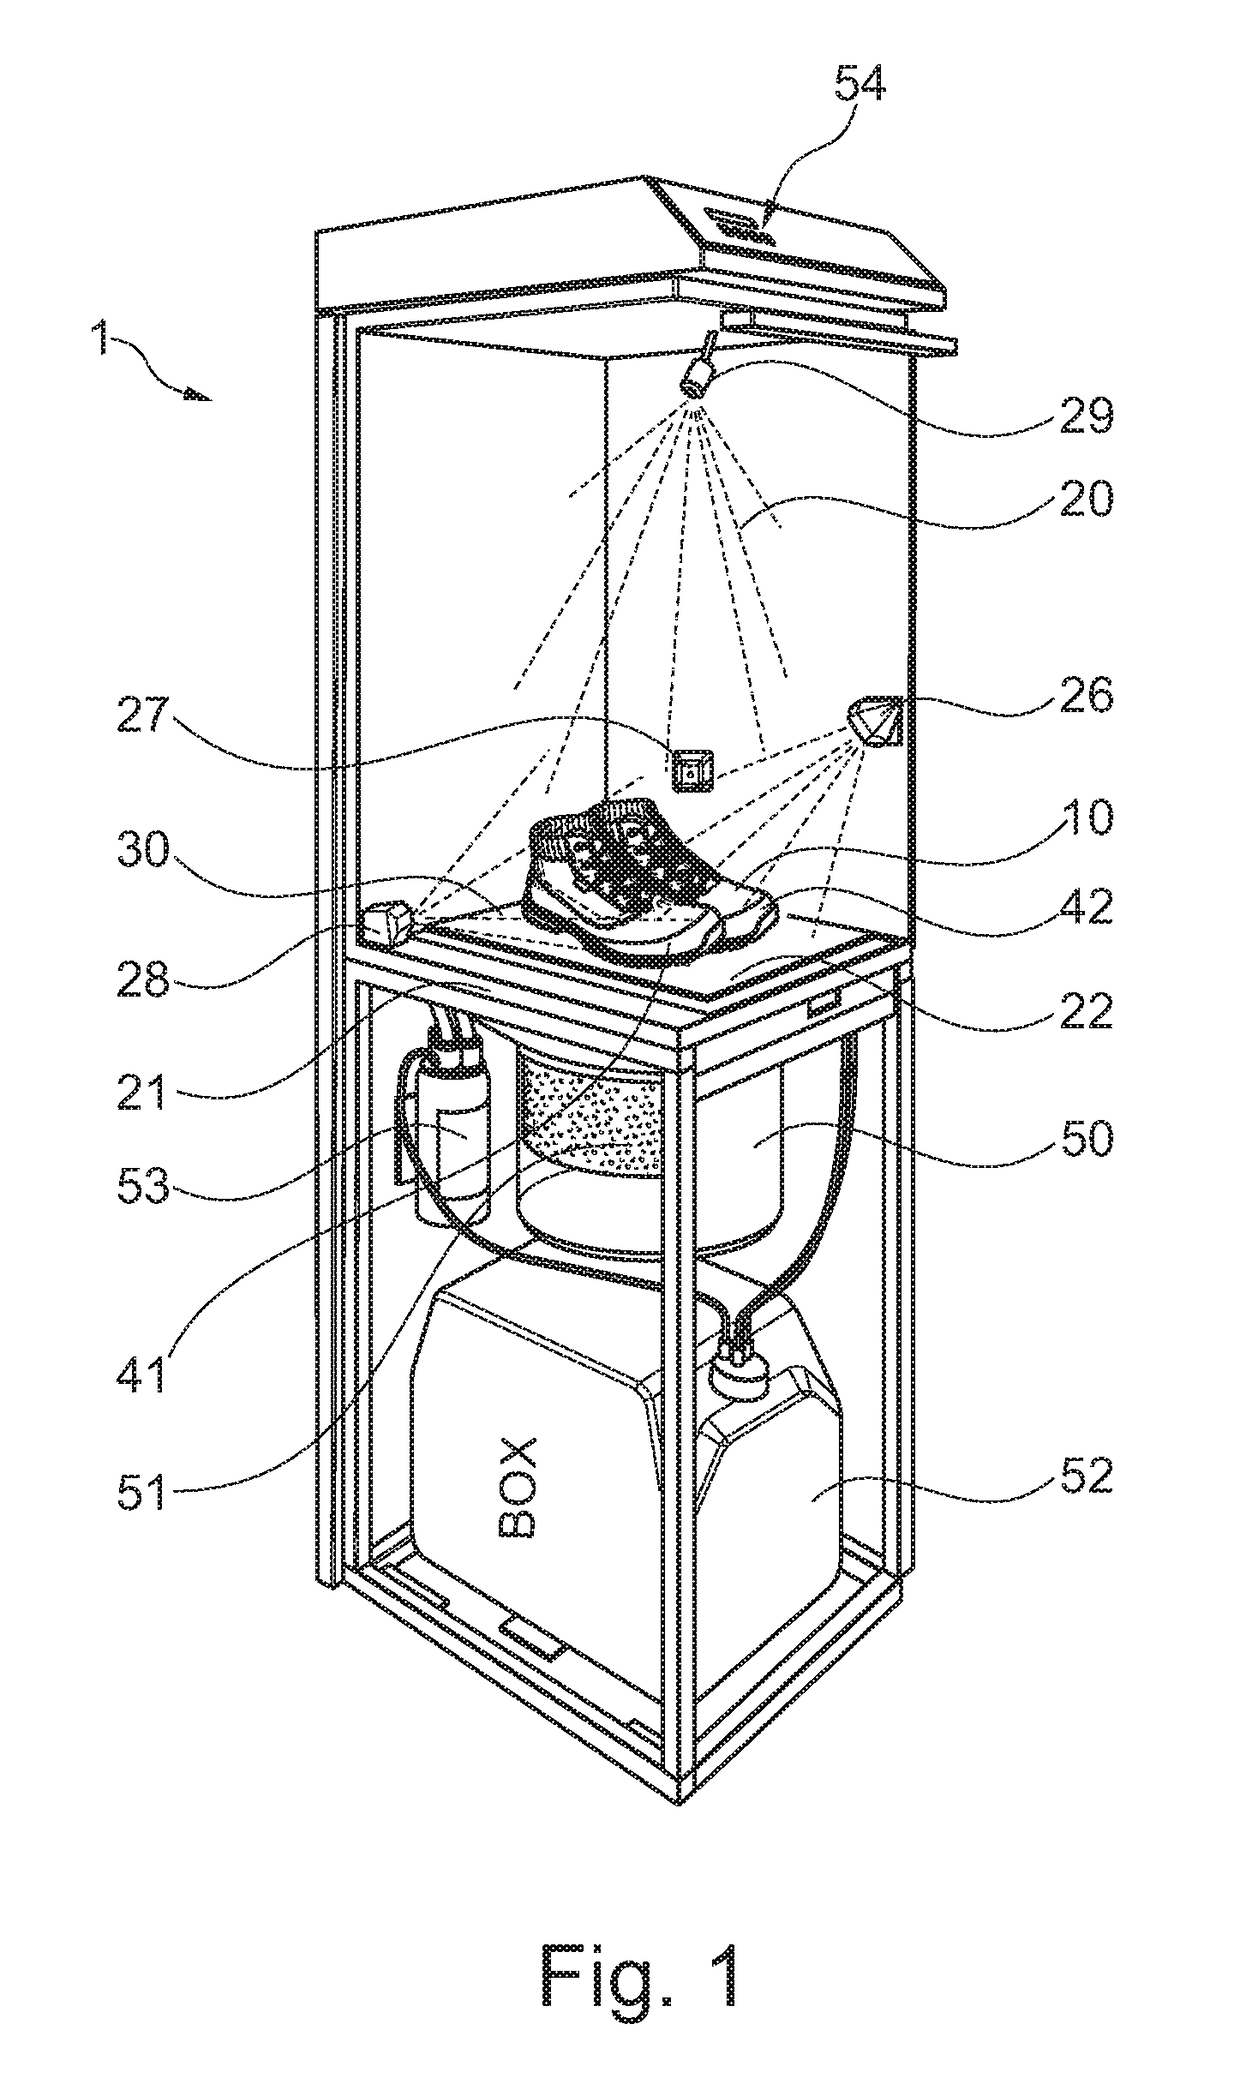 Apparatus and method for applying an impregnating agent onto surfaces of items, in particular footwear